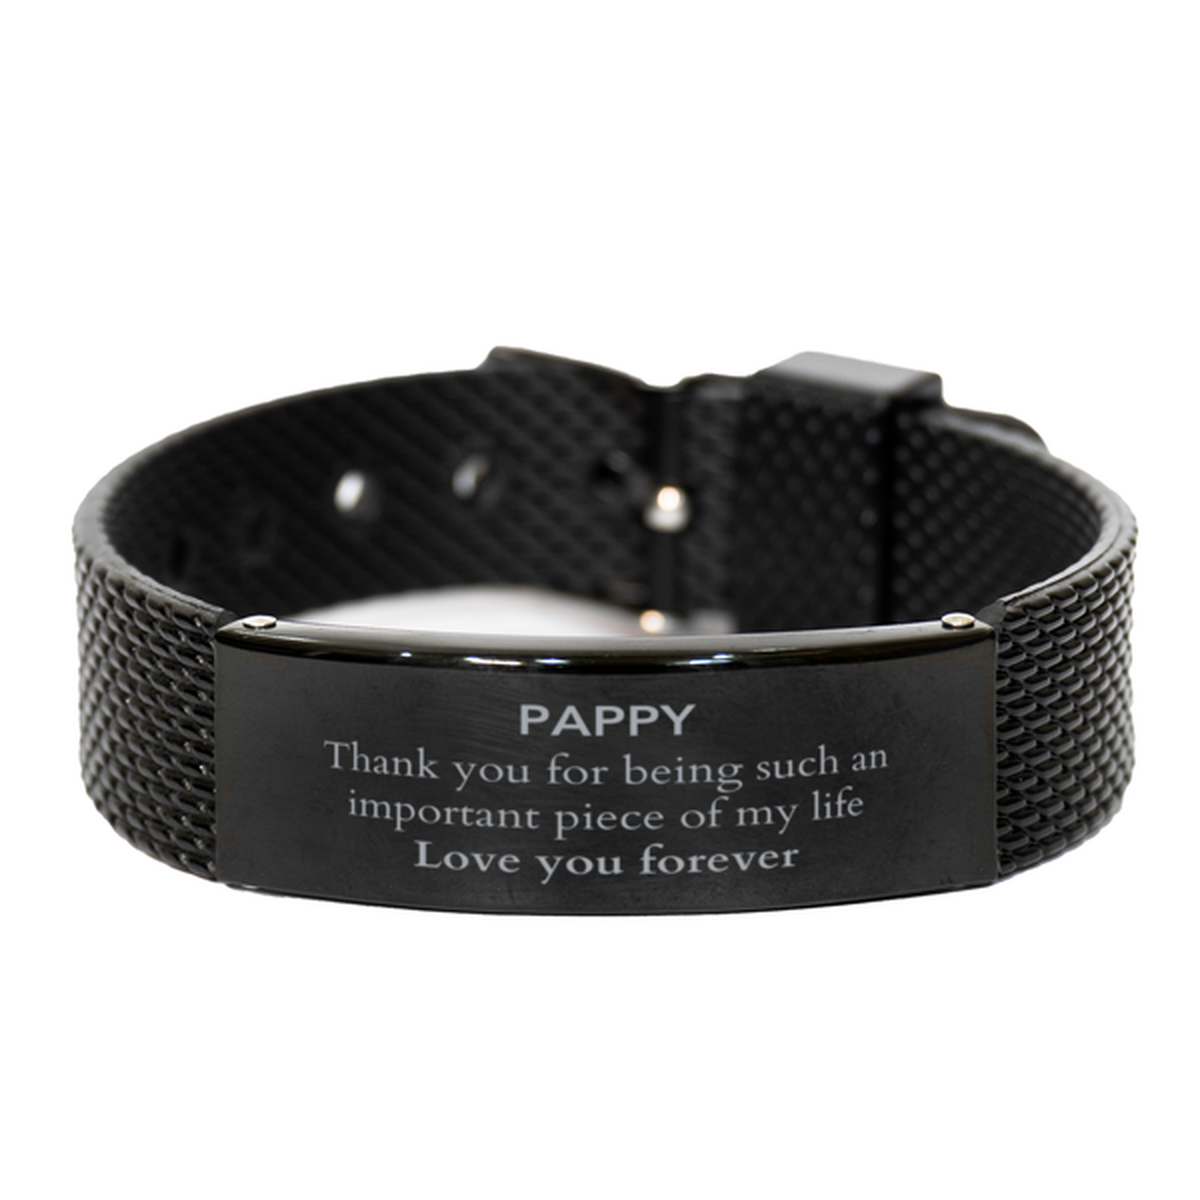 Appropriate Pappy Black Shark Mesh Bracelet Epic Birthday Gifts for Pappy Thank you for being such an important piece of my life Pappy Christmas Mothers Fathers Day